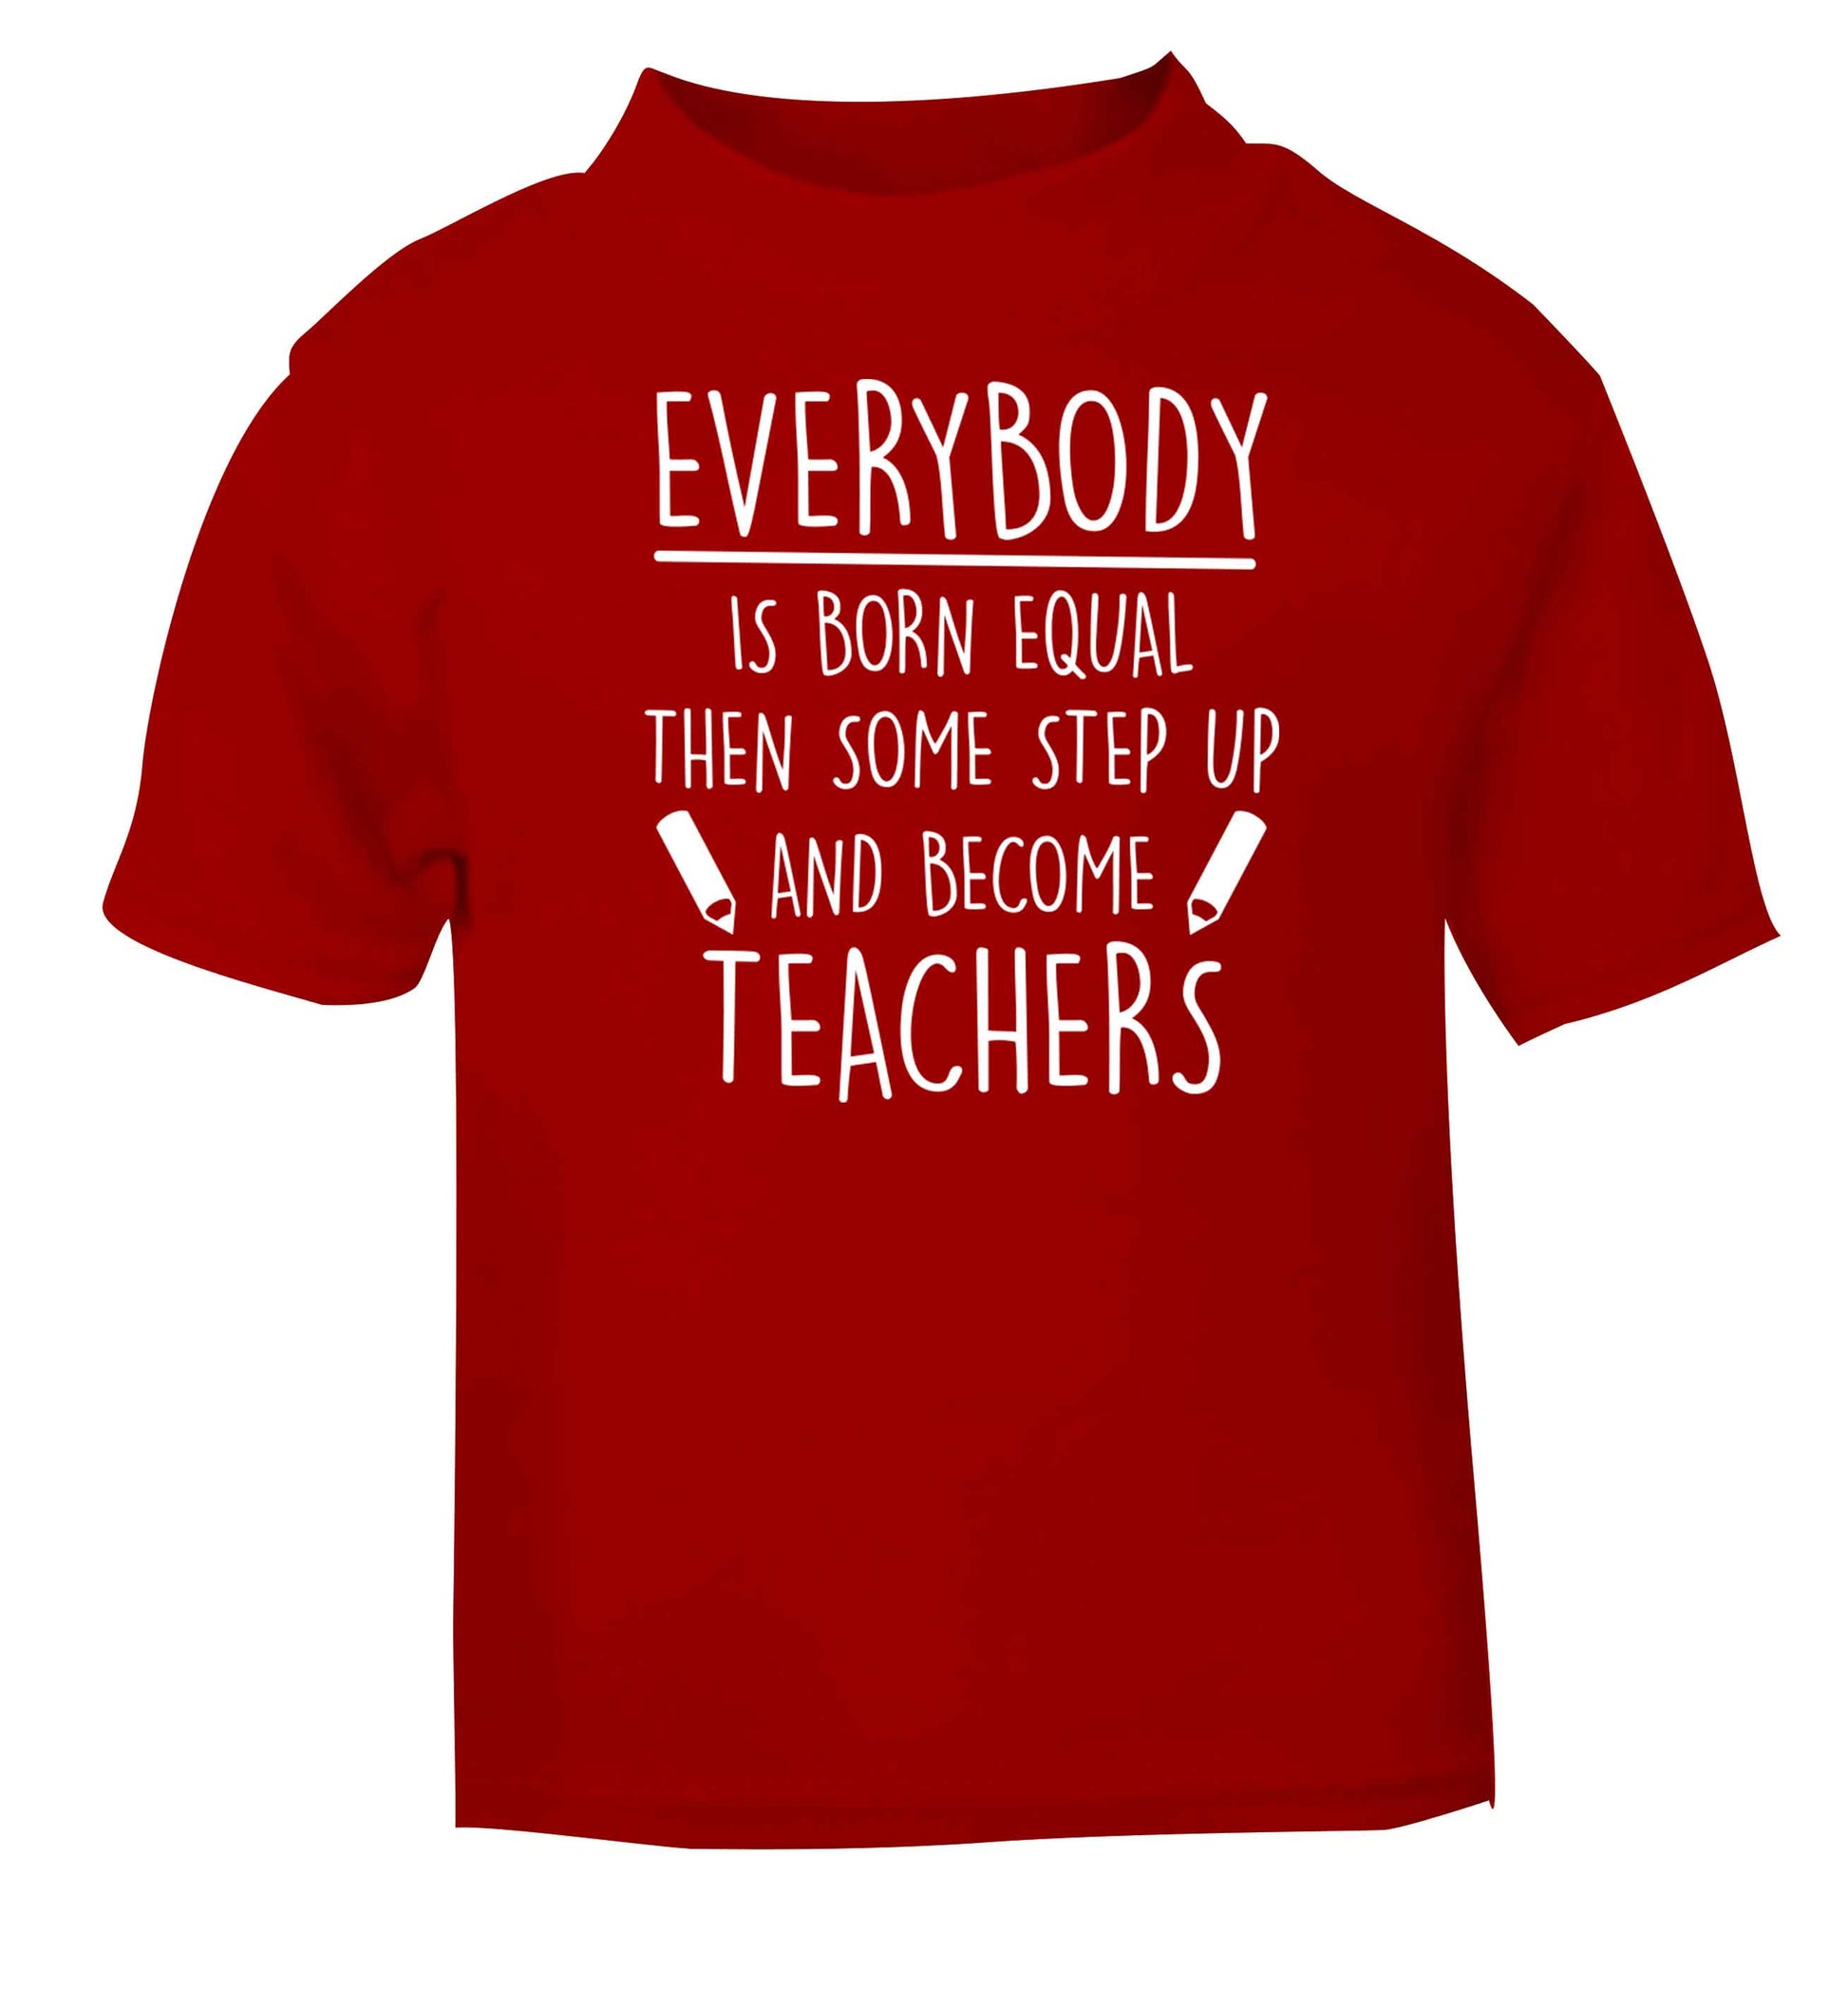 Everybody is born equal then some step up and become teachers red baby toddler Tshirt 2 Years